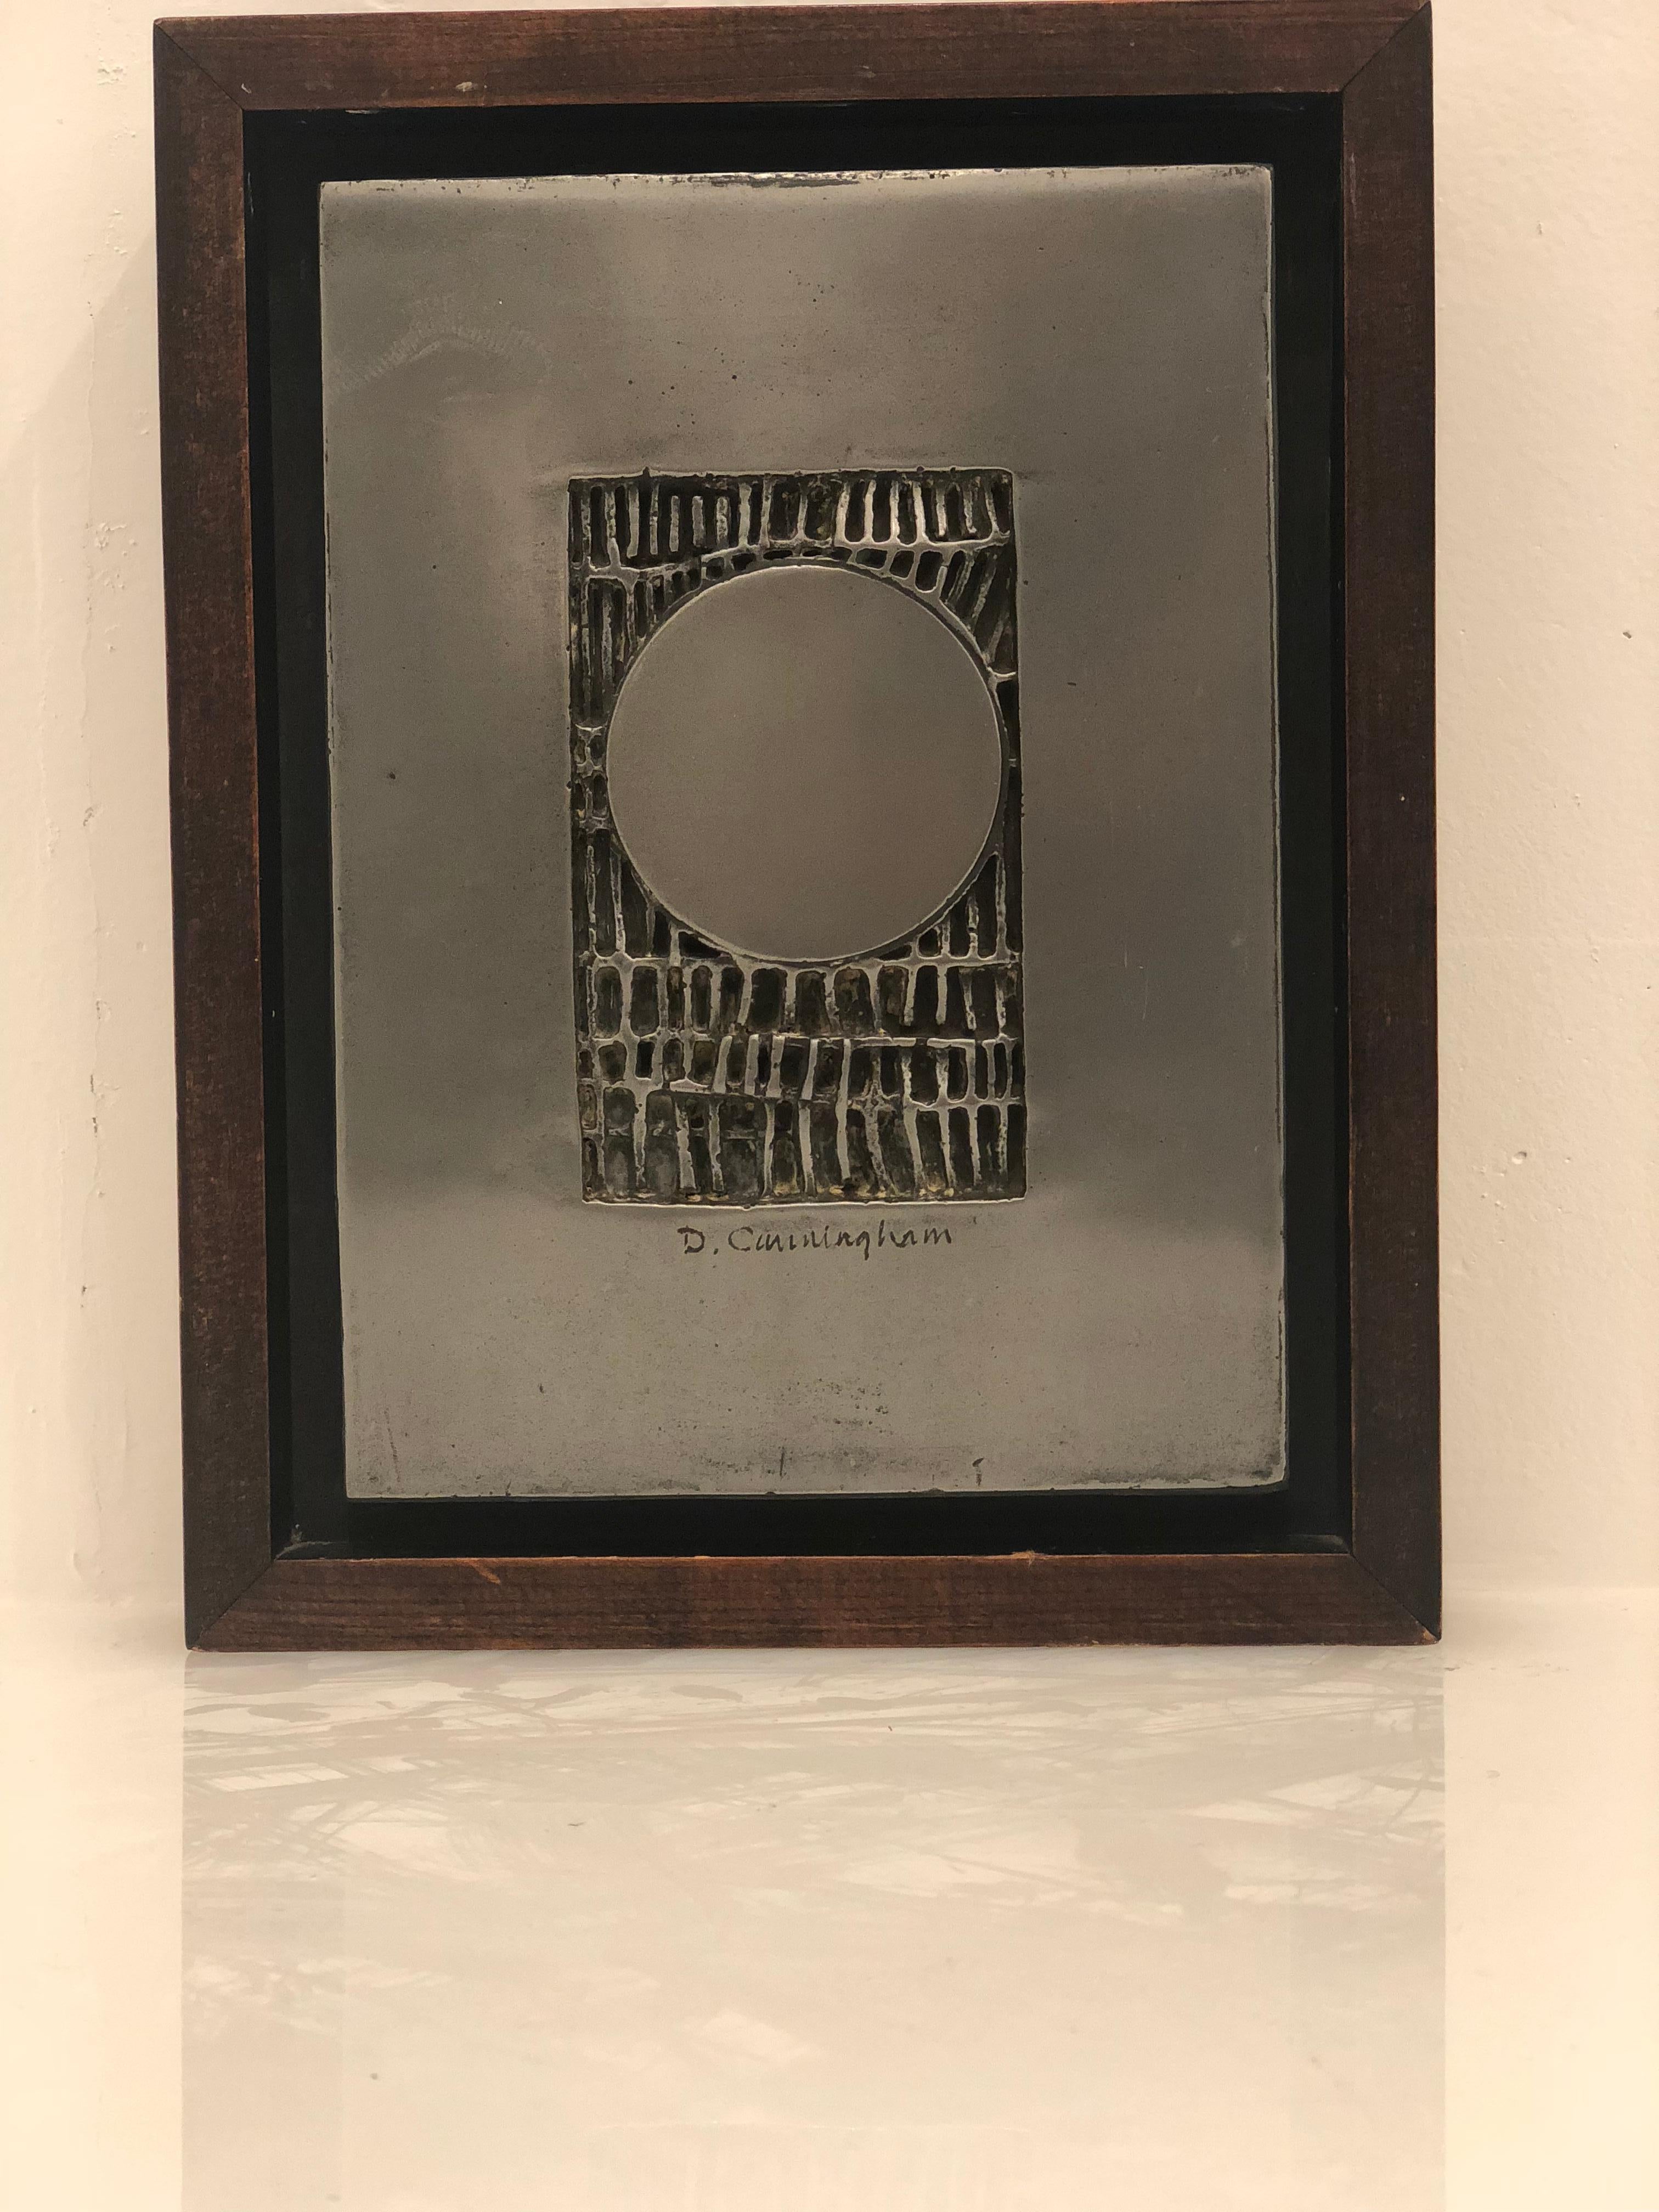 Abstract wall plaque by San Diego artist D Cunningham, cast aluminum on solid walnut stainwood frame, circa 1970s original frame signed on the plaque.